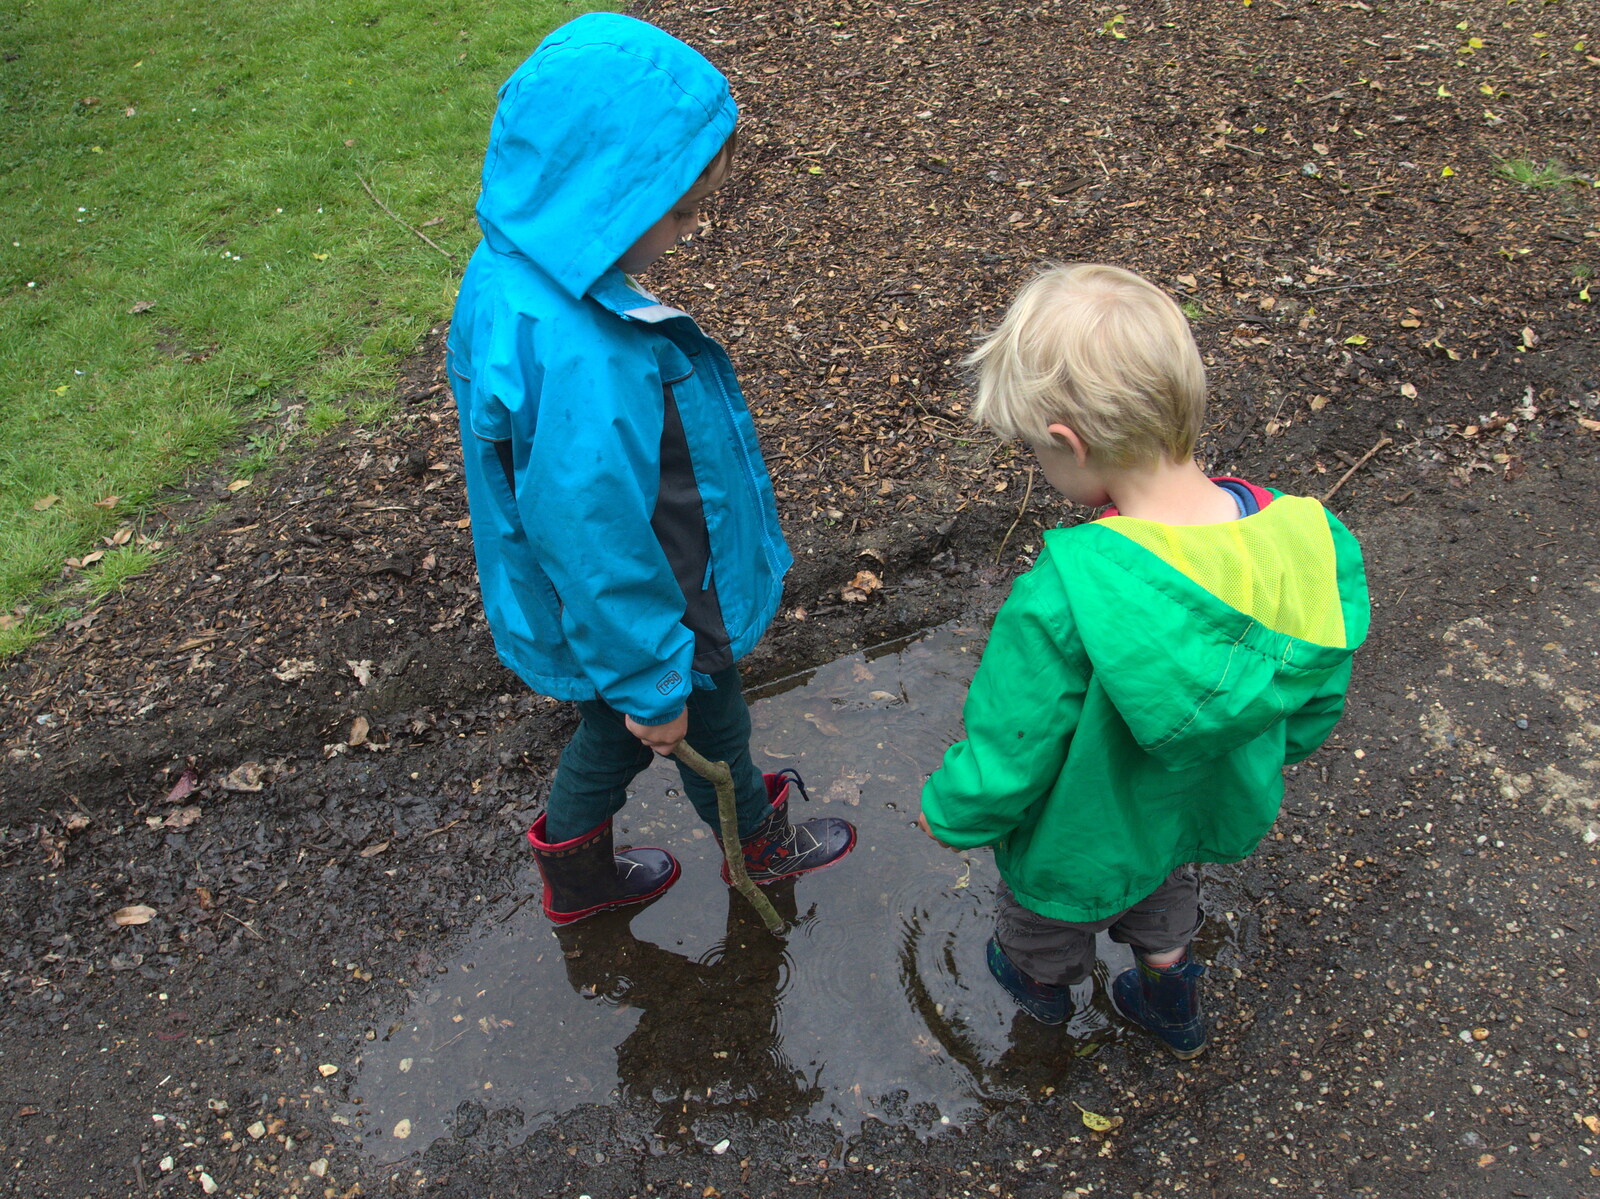 The boys stand around in puddles from Thursday BSCC Bike Rides, Thelnetham and Earl Soham, Suffolk - 31st May 2015